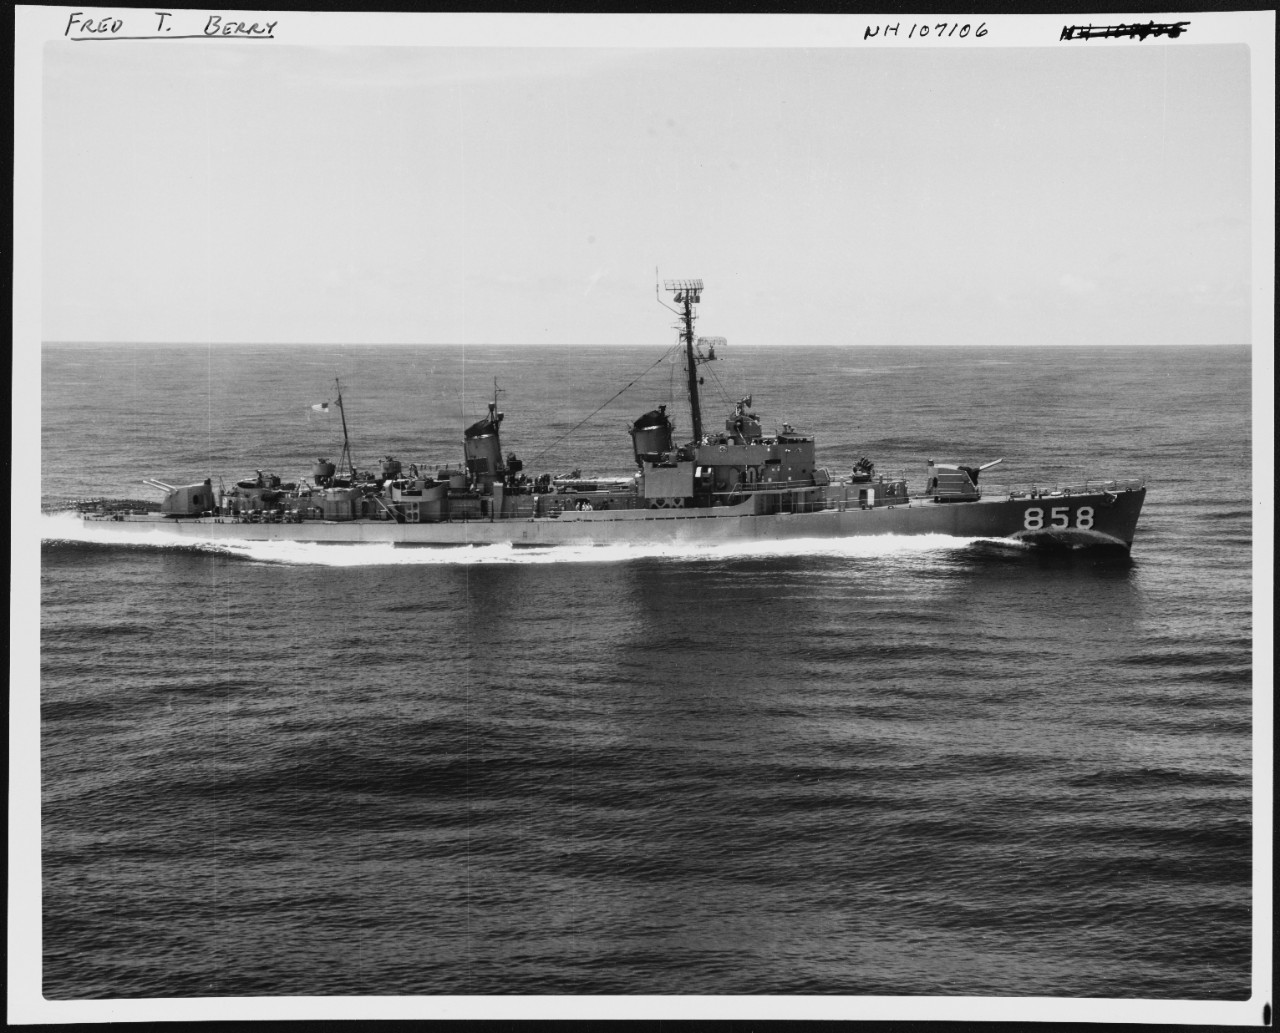 Photo #: NH 107106  USS Fred T. Berry